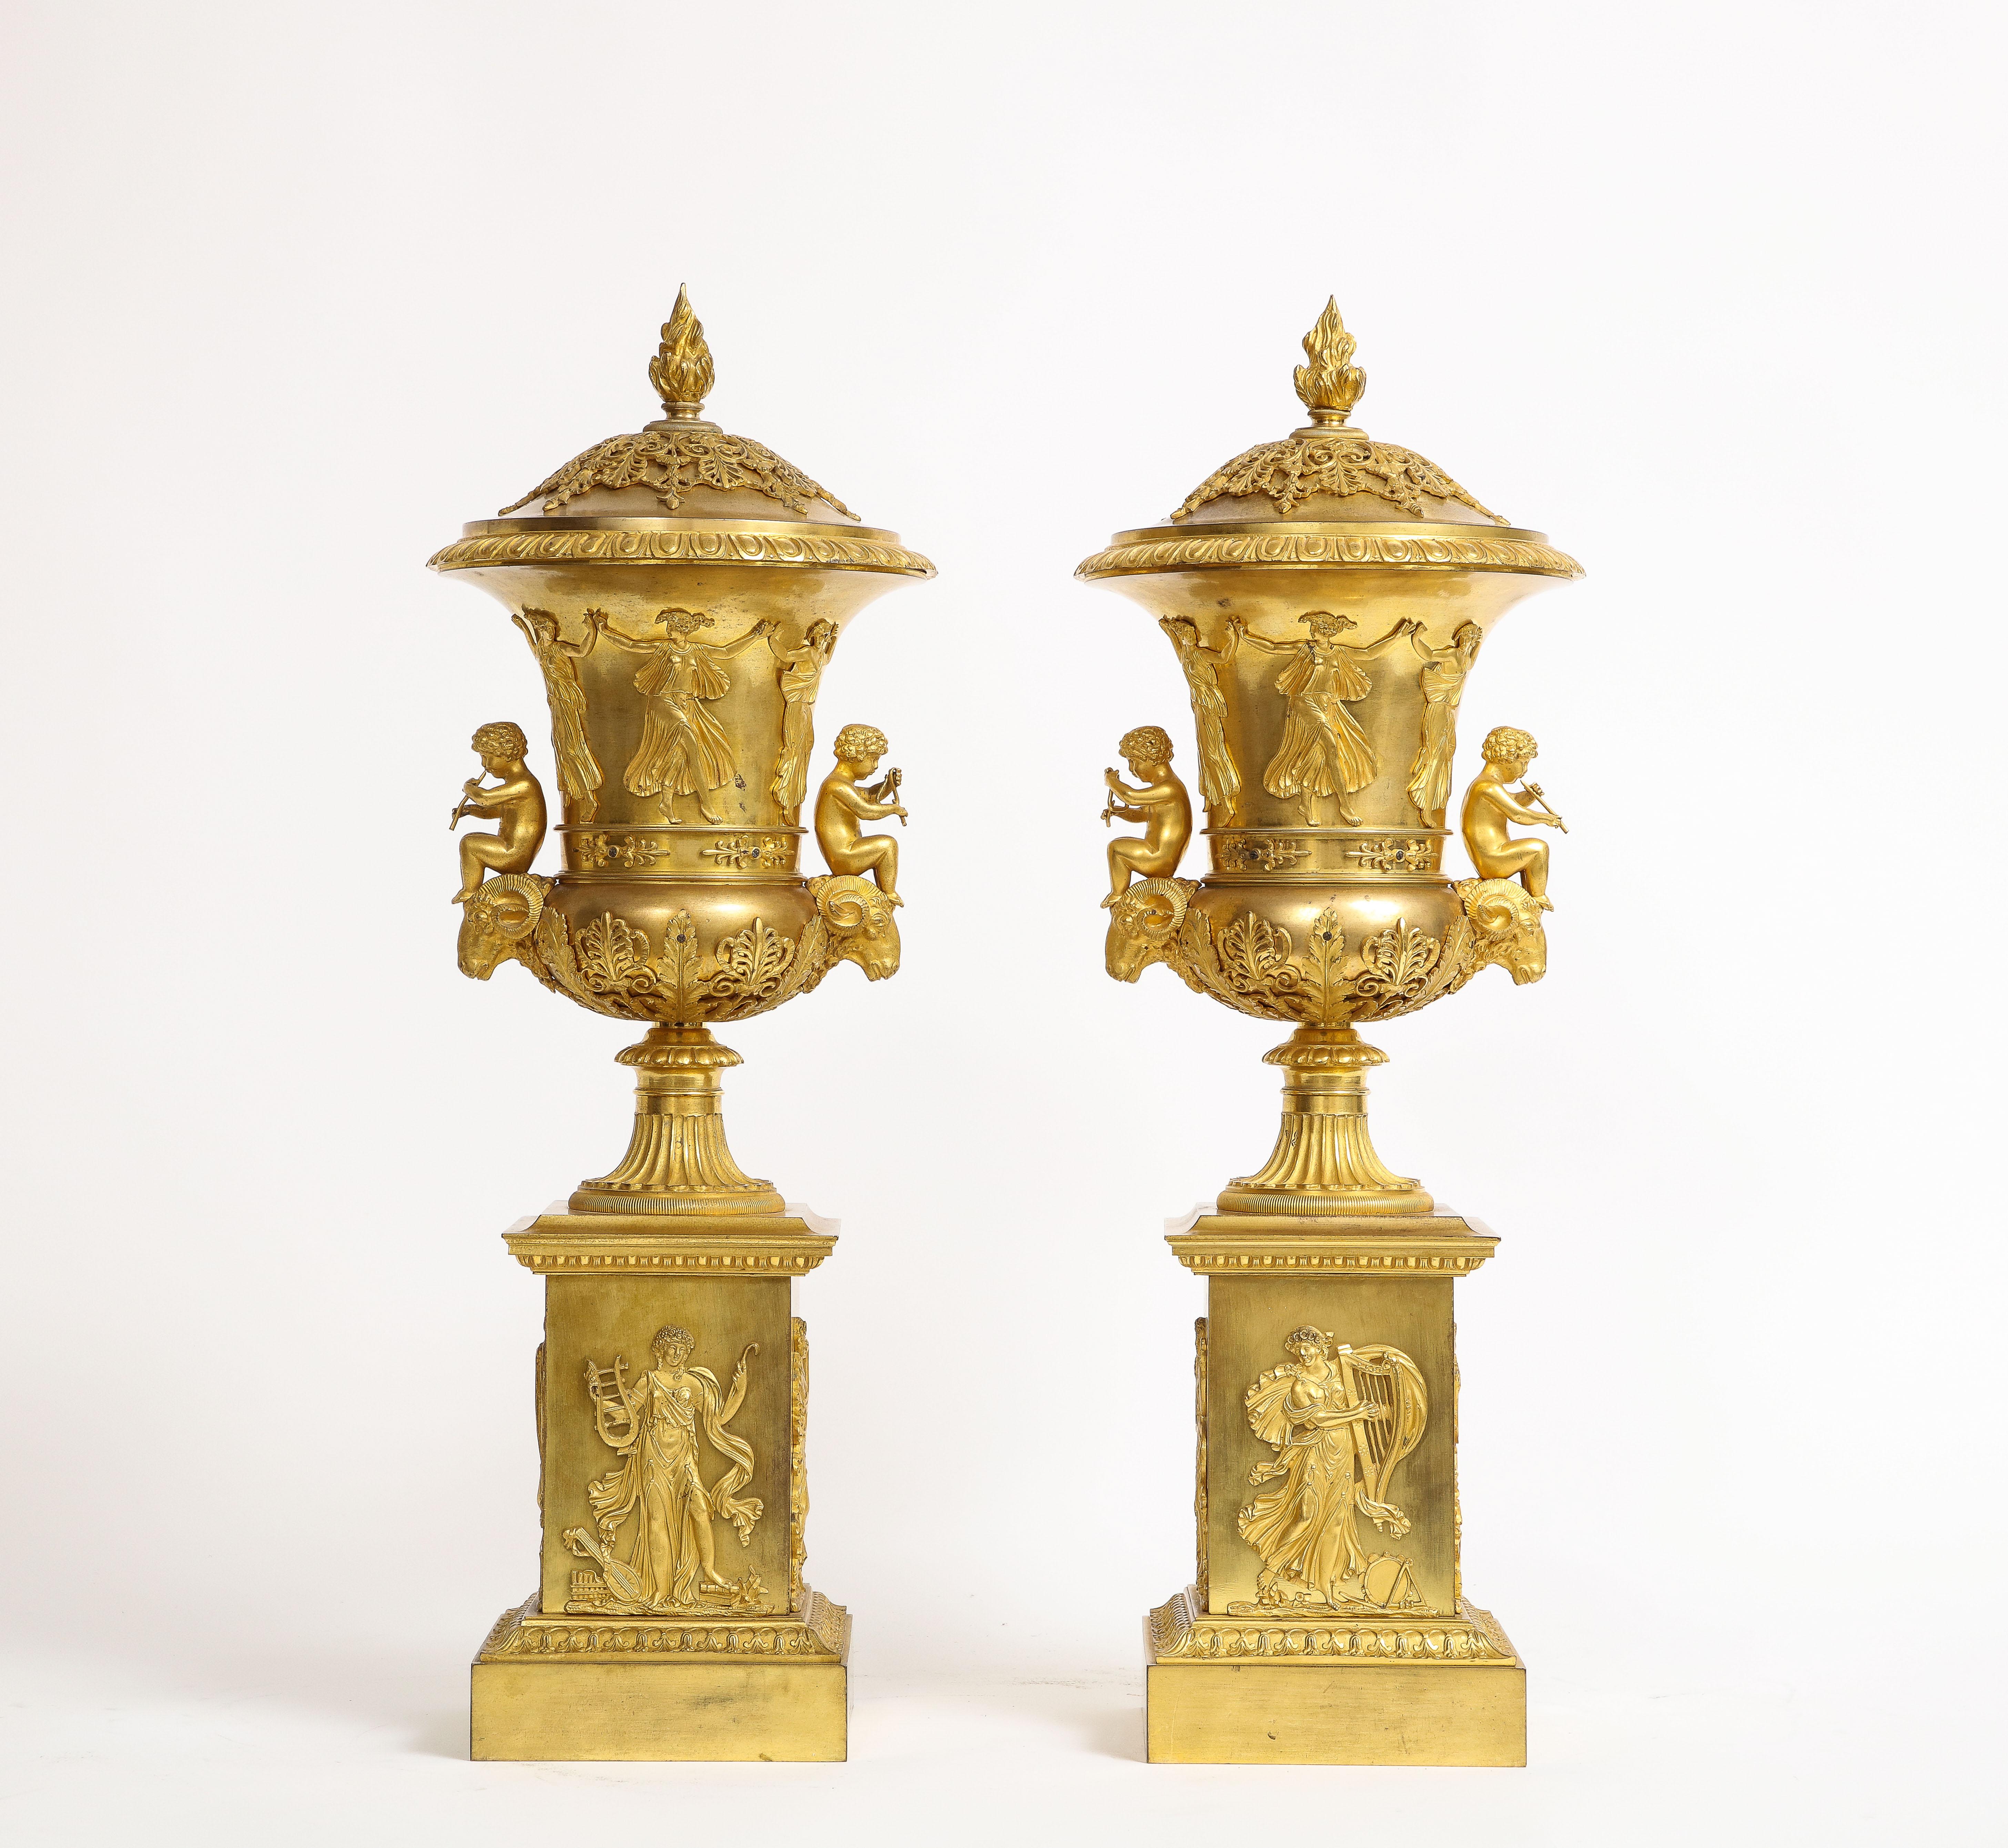 An Incredible and Rare Pair of 19th Century French Ormolu Covered Potpourris, Attributed to Thomier A Paris. This pair dates to 1810, which is the illustrious French Empire period. These remarkable urns serve as prime examples of the impeccable